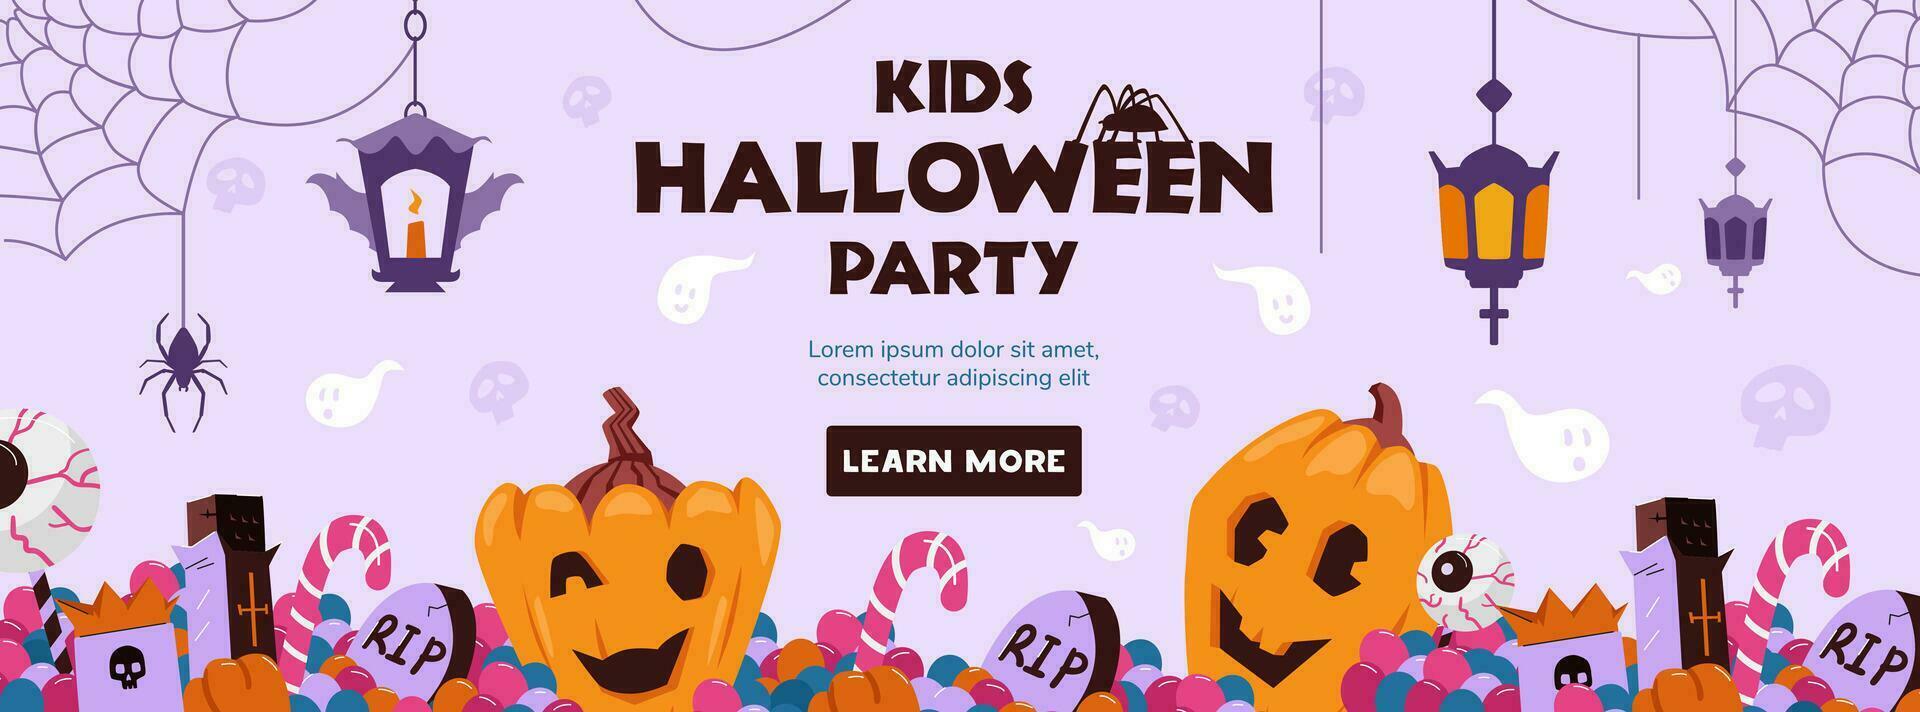 Halloween kids party invitation vector banner. Halloween banner with pumpkins and sweets.